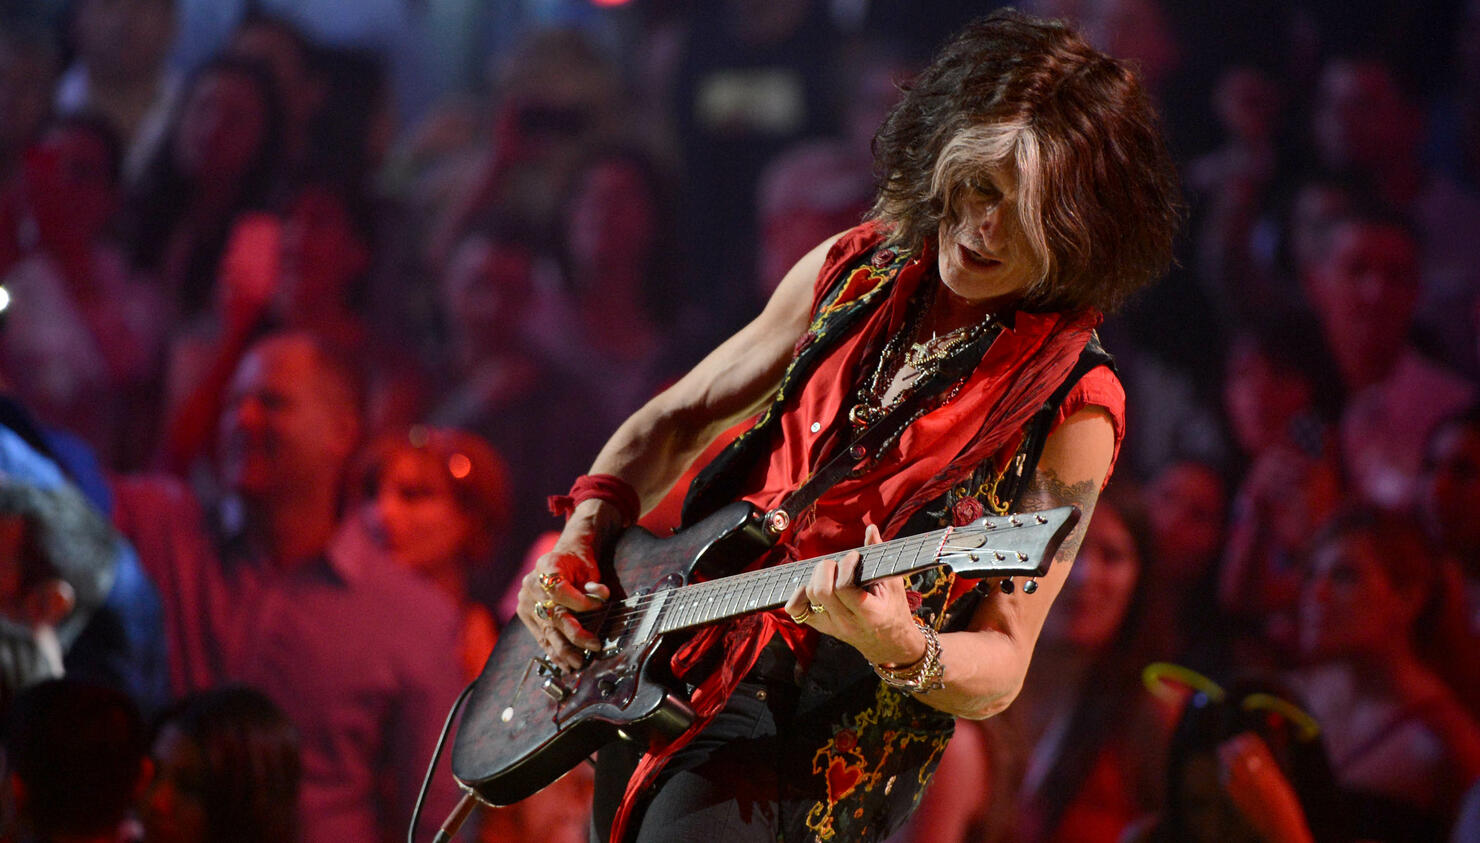 Joe Perry to Return to the Stage Following Health Scare